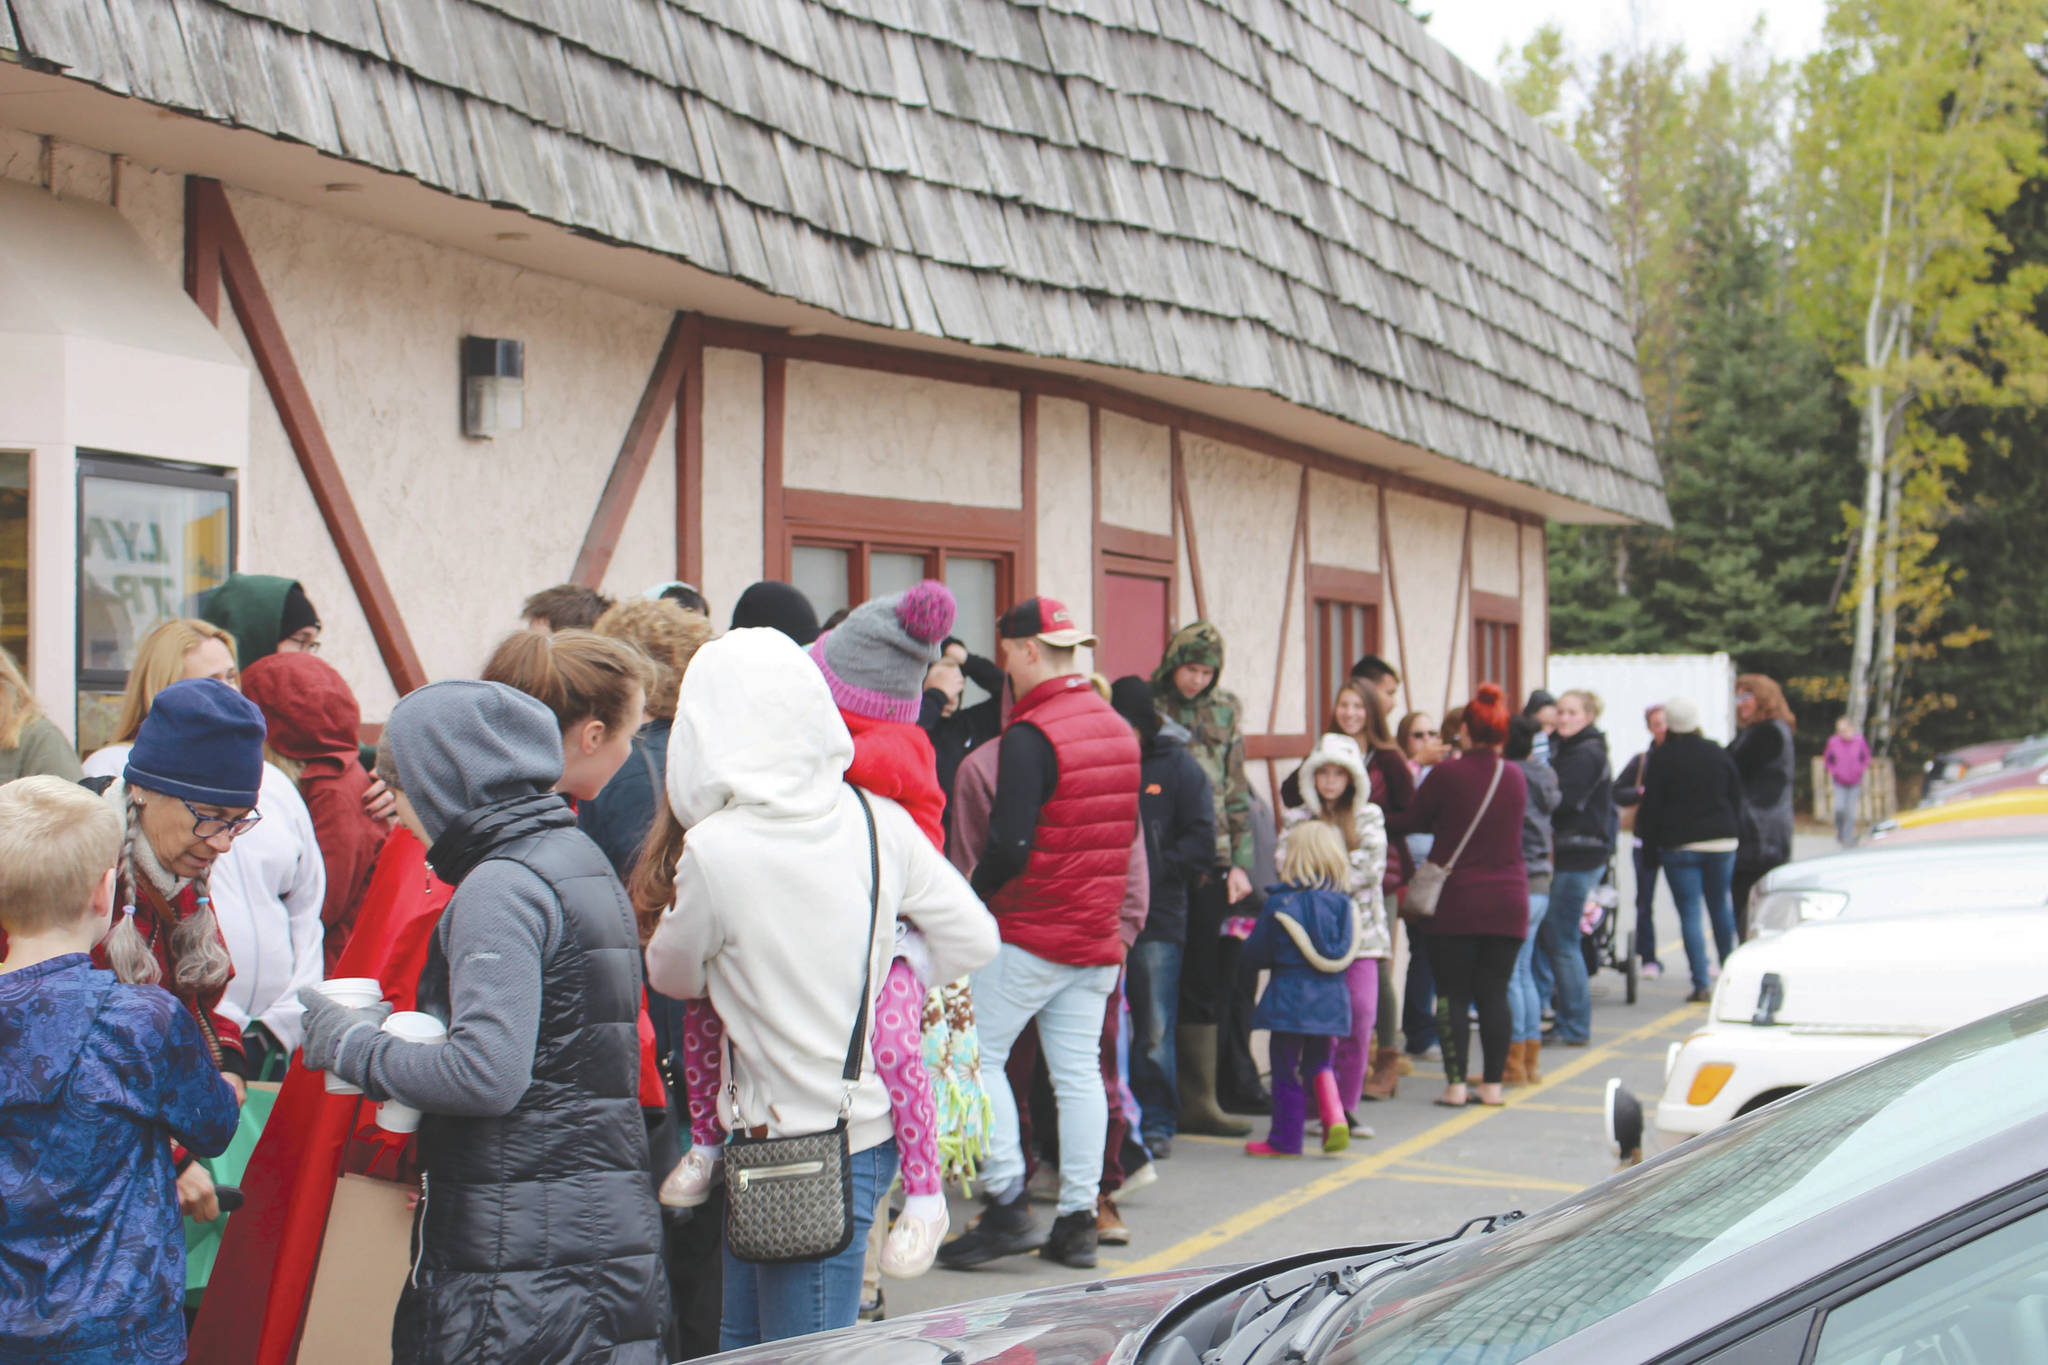 Photo by Brian Mazurek/Peninsula Clarion                                 The line outside of the Moose is Loose Bakery can be seen here on their last day of business in Soldotna, Alaska on Sept. 28, 2019.